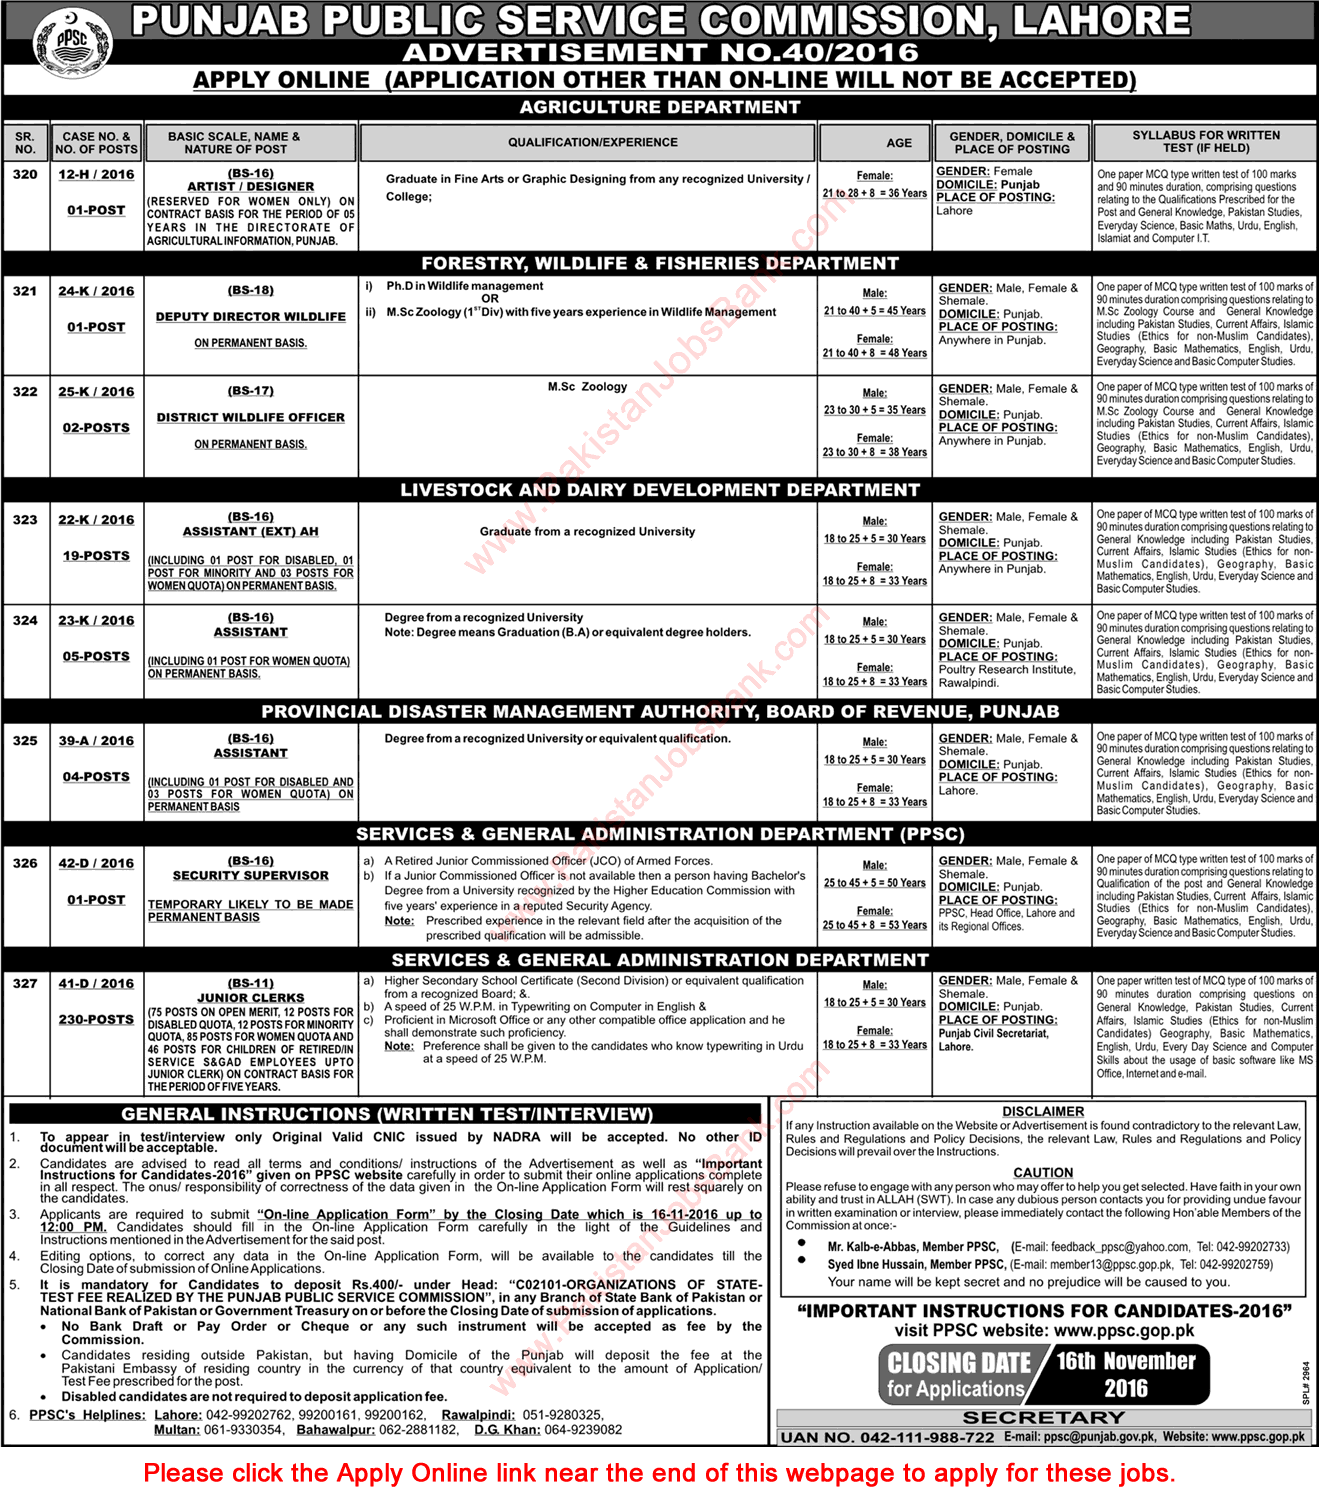 PPSC Jobs November 2016 Consolidated Advertisement No 40/2016 Apply Online Latest